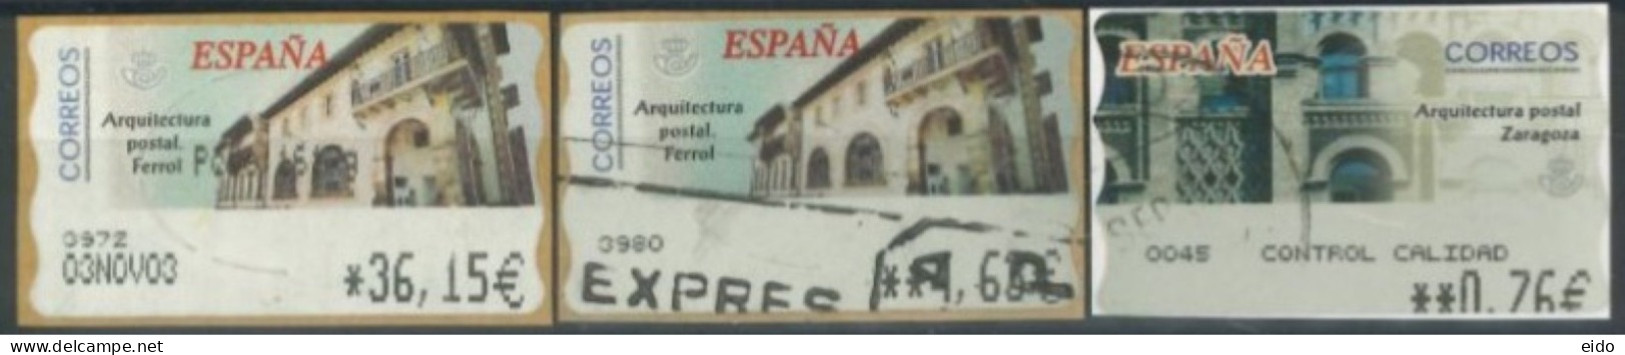 SPAIN - 2003 - POSTAL ARCHITECTURE FERROL & ZARAGOZA STAMPS LABELS SET OF 3 OF DIFFERENT VALUES, USED . - Usados